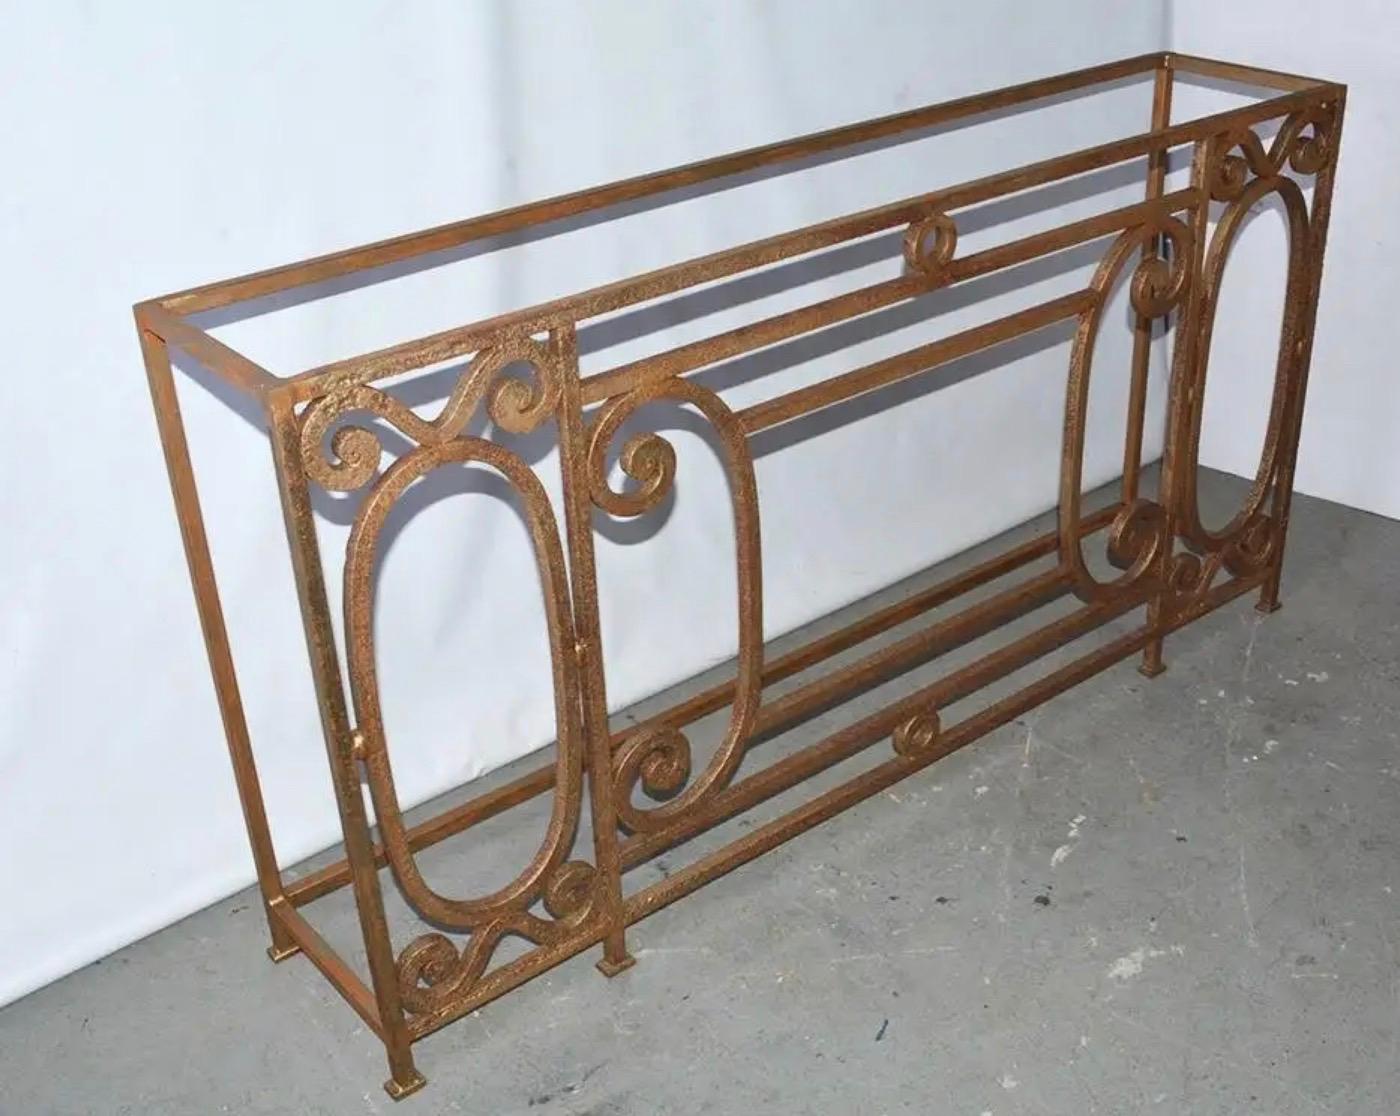 Custom Baroque-Style Wrought Iron Console Table or Server Base In Good Condition For Sale In Sheffield, MA